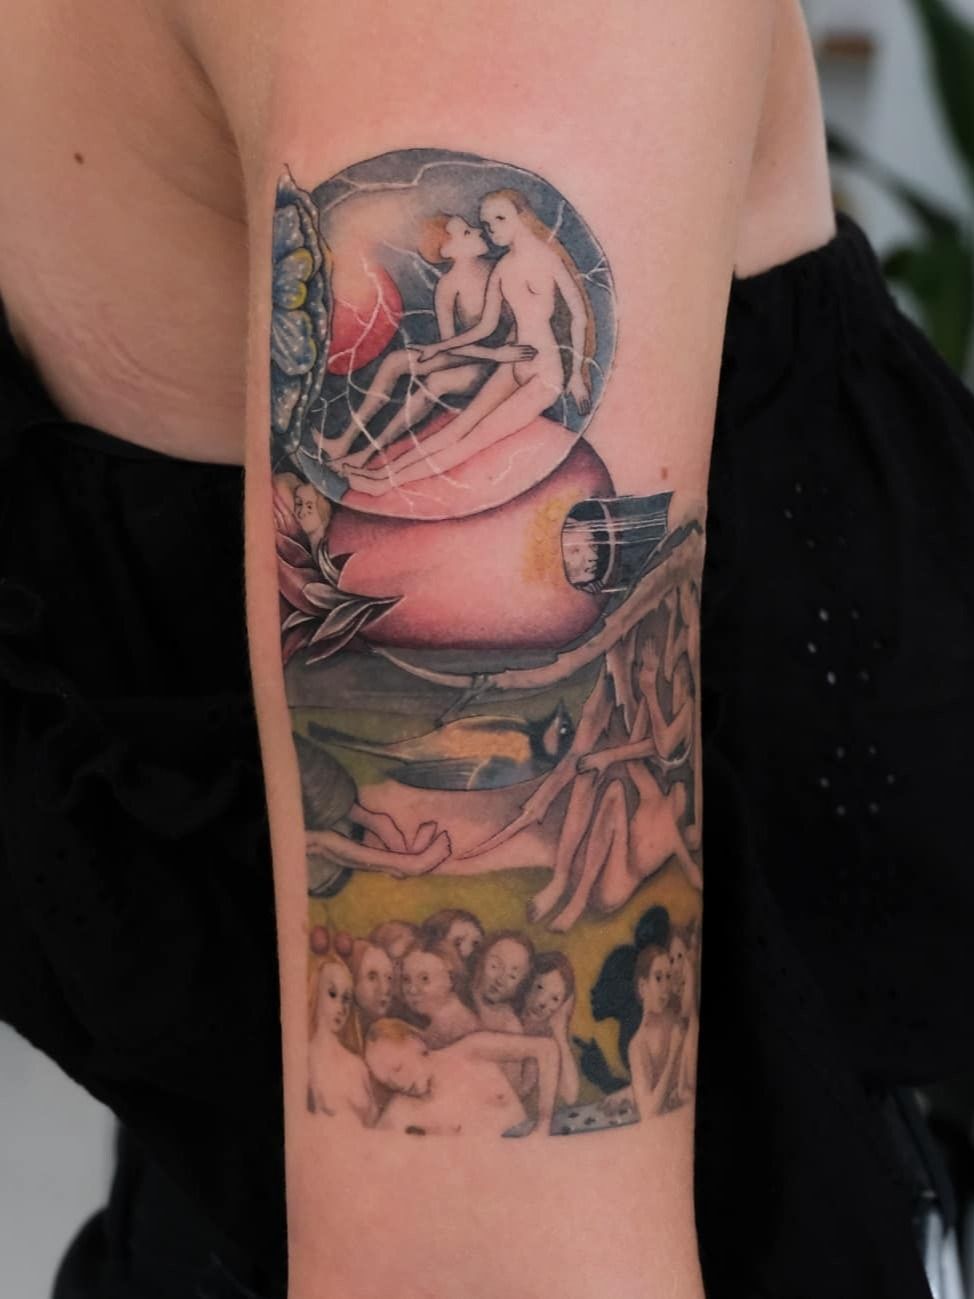 Hieronymus Bosch character. My new favorite tattoo, taken minutes after  completion. By @sethbeastmeat (instagram) at True Love Seattle. : r/tattoos